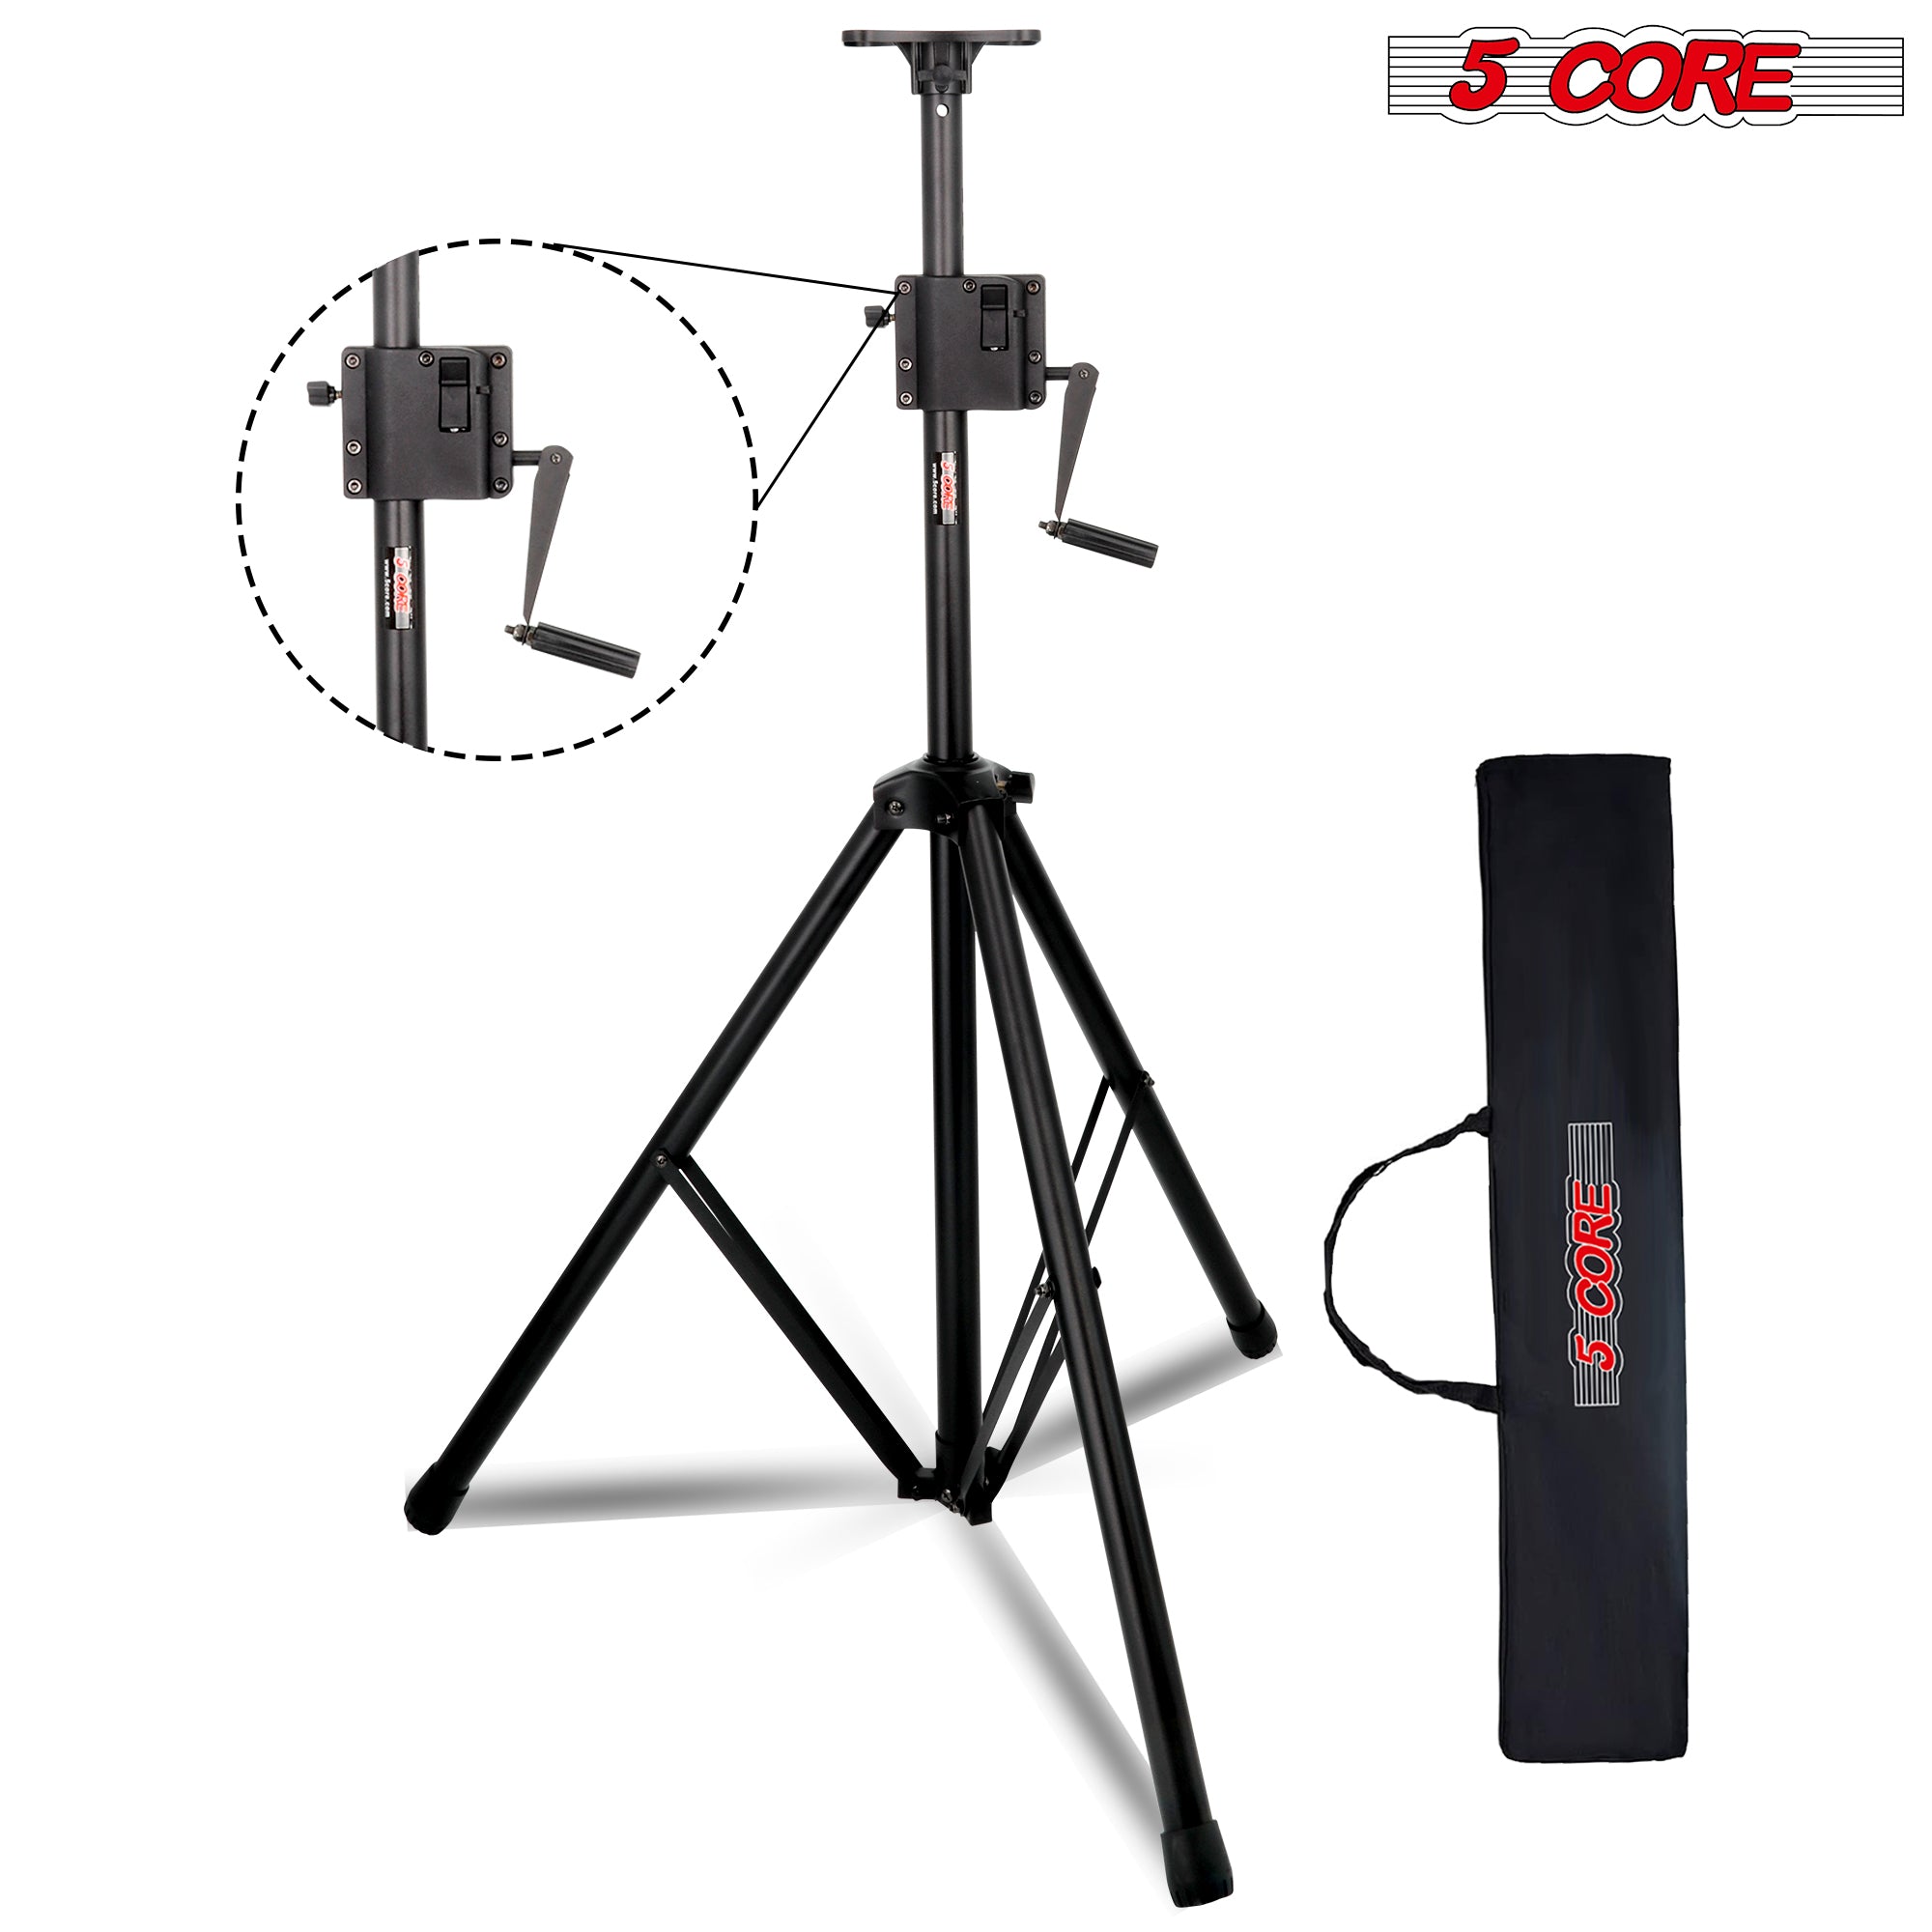 5 Core Crank Up Speaker Stand Height Adjustable 6ft 10" Max Heavy Duty 185LB Load Capacity